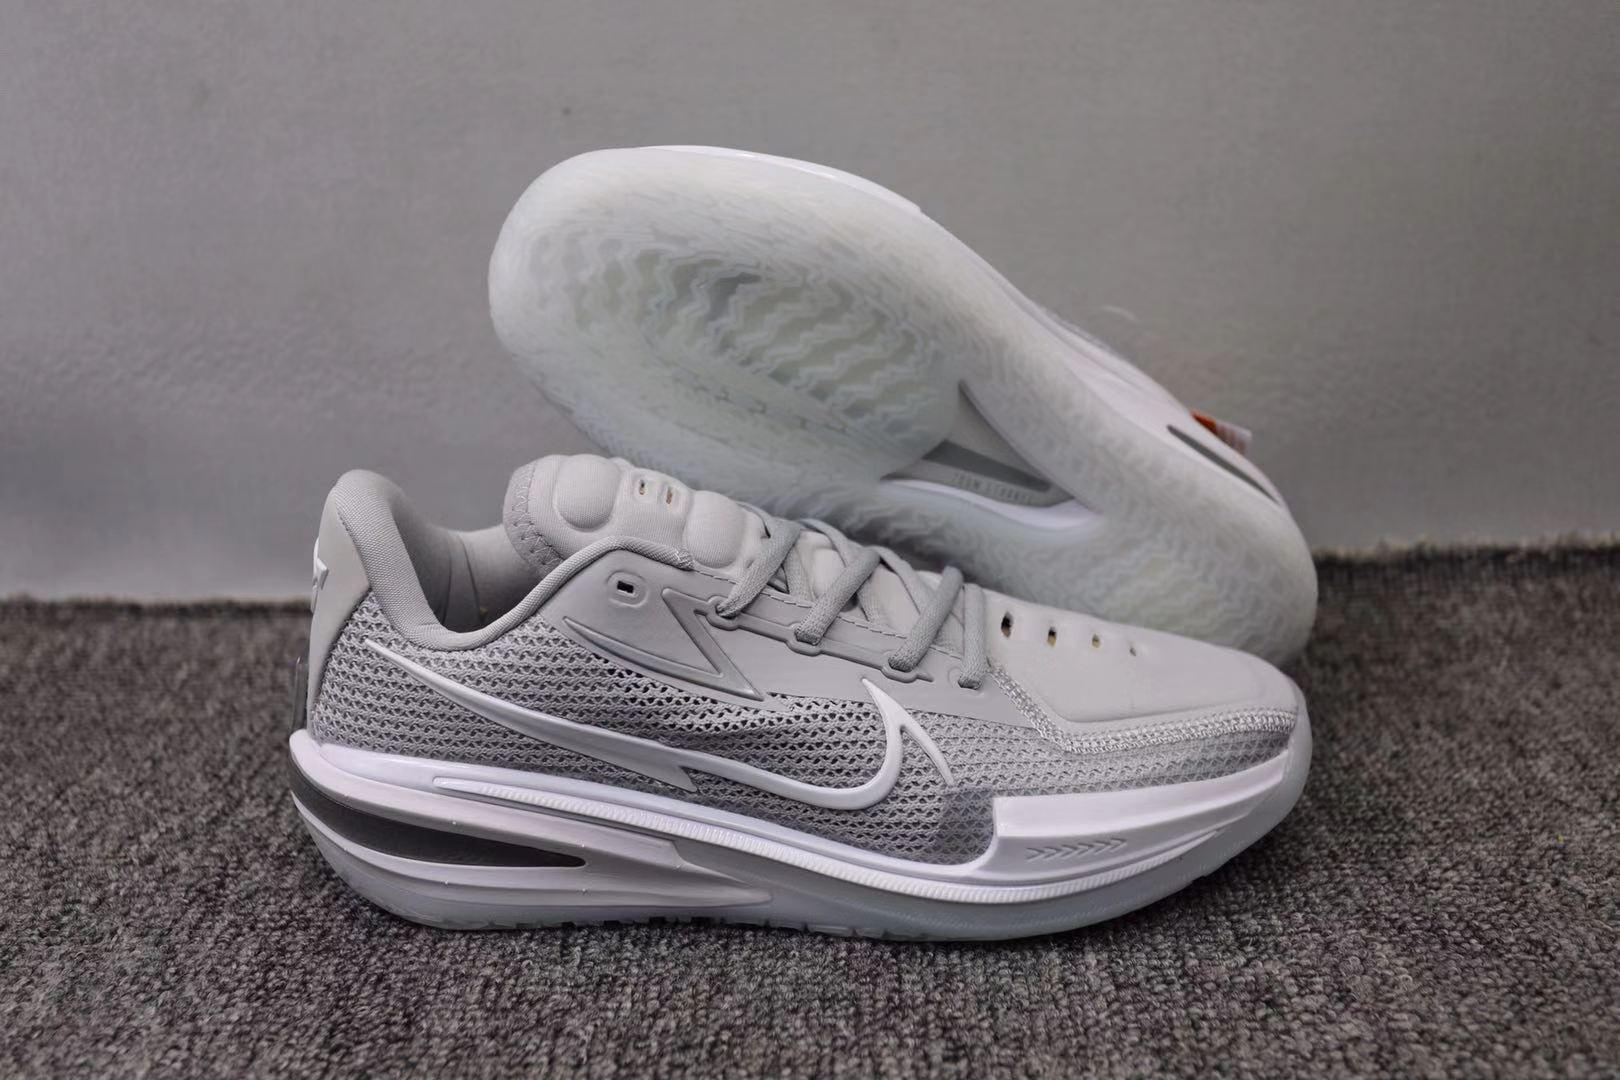 New Nike Zoom GT Cut Cool Grey Shoes